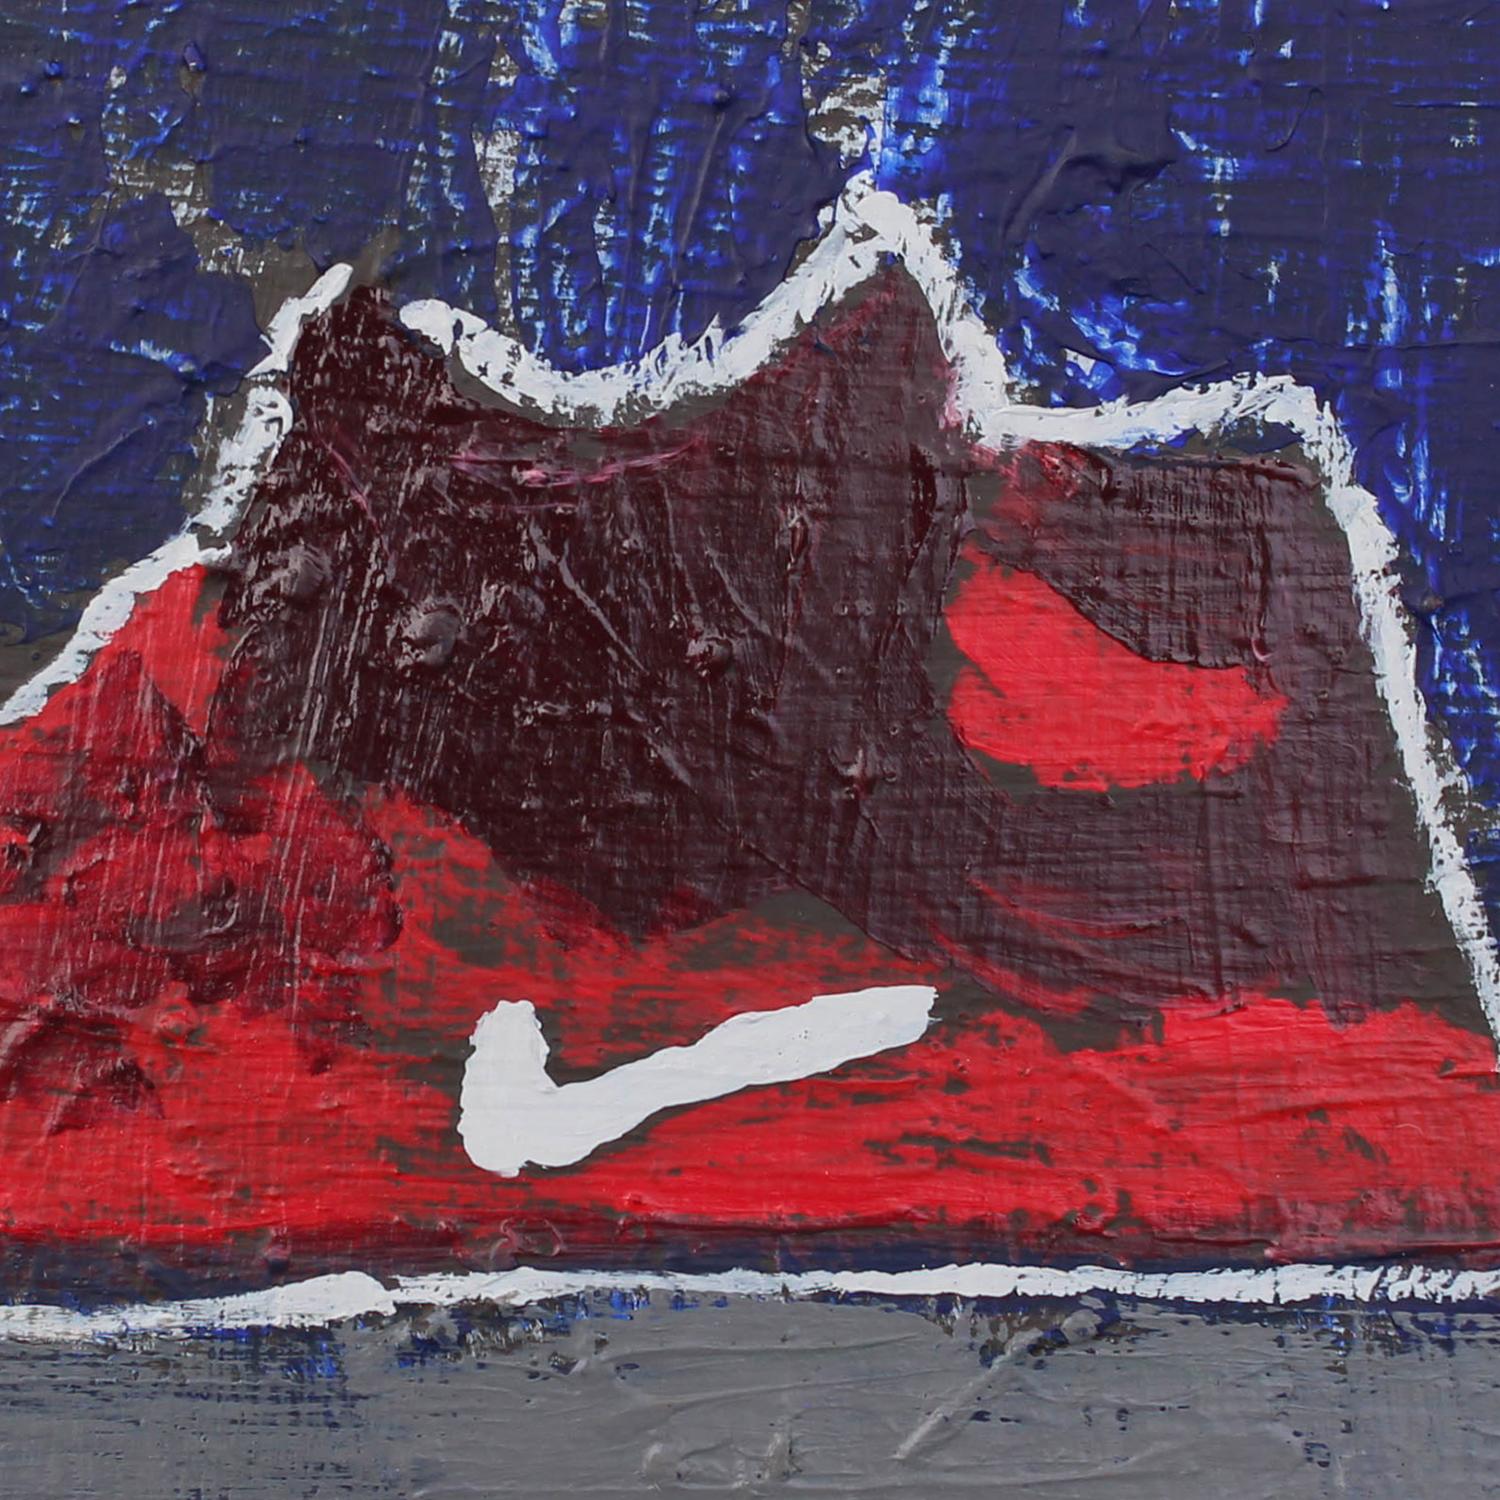 Nike Shoe - Painting by Brendan O'Connell